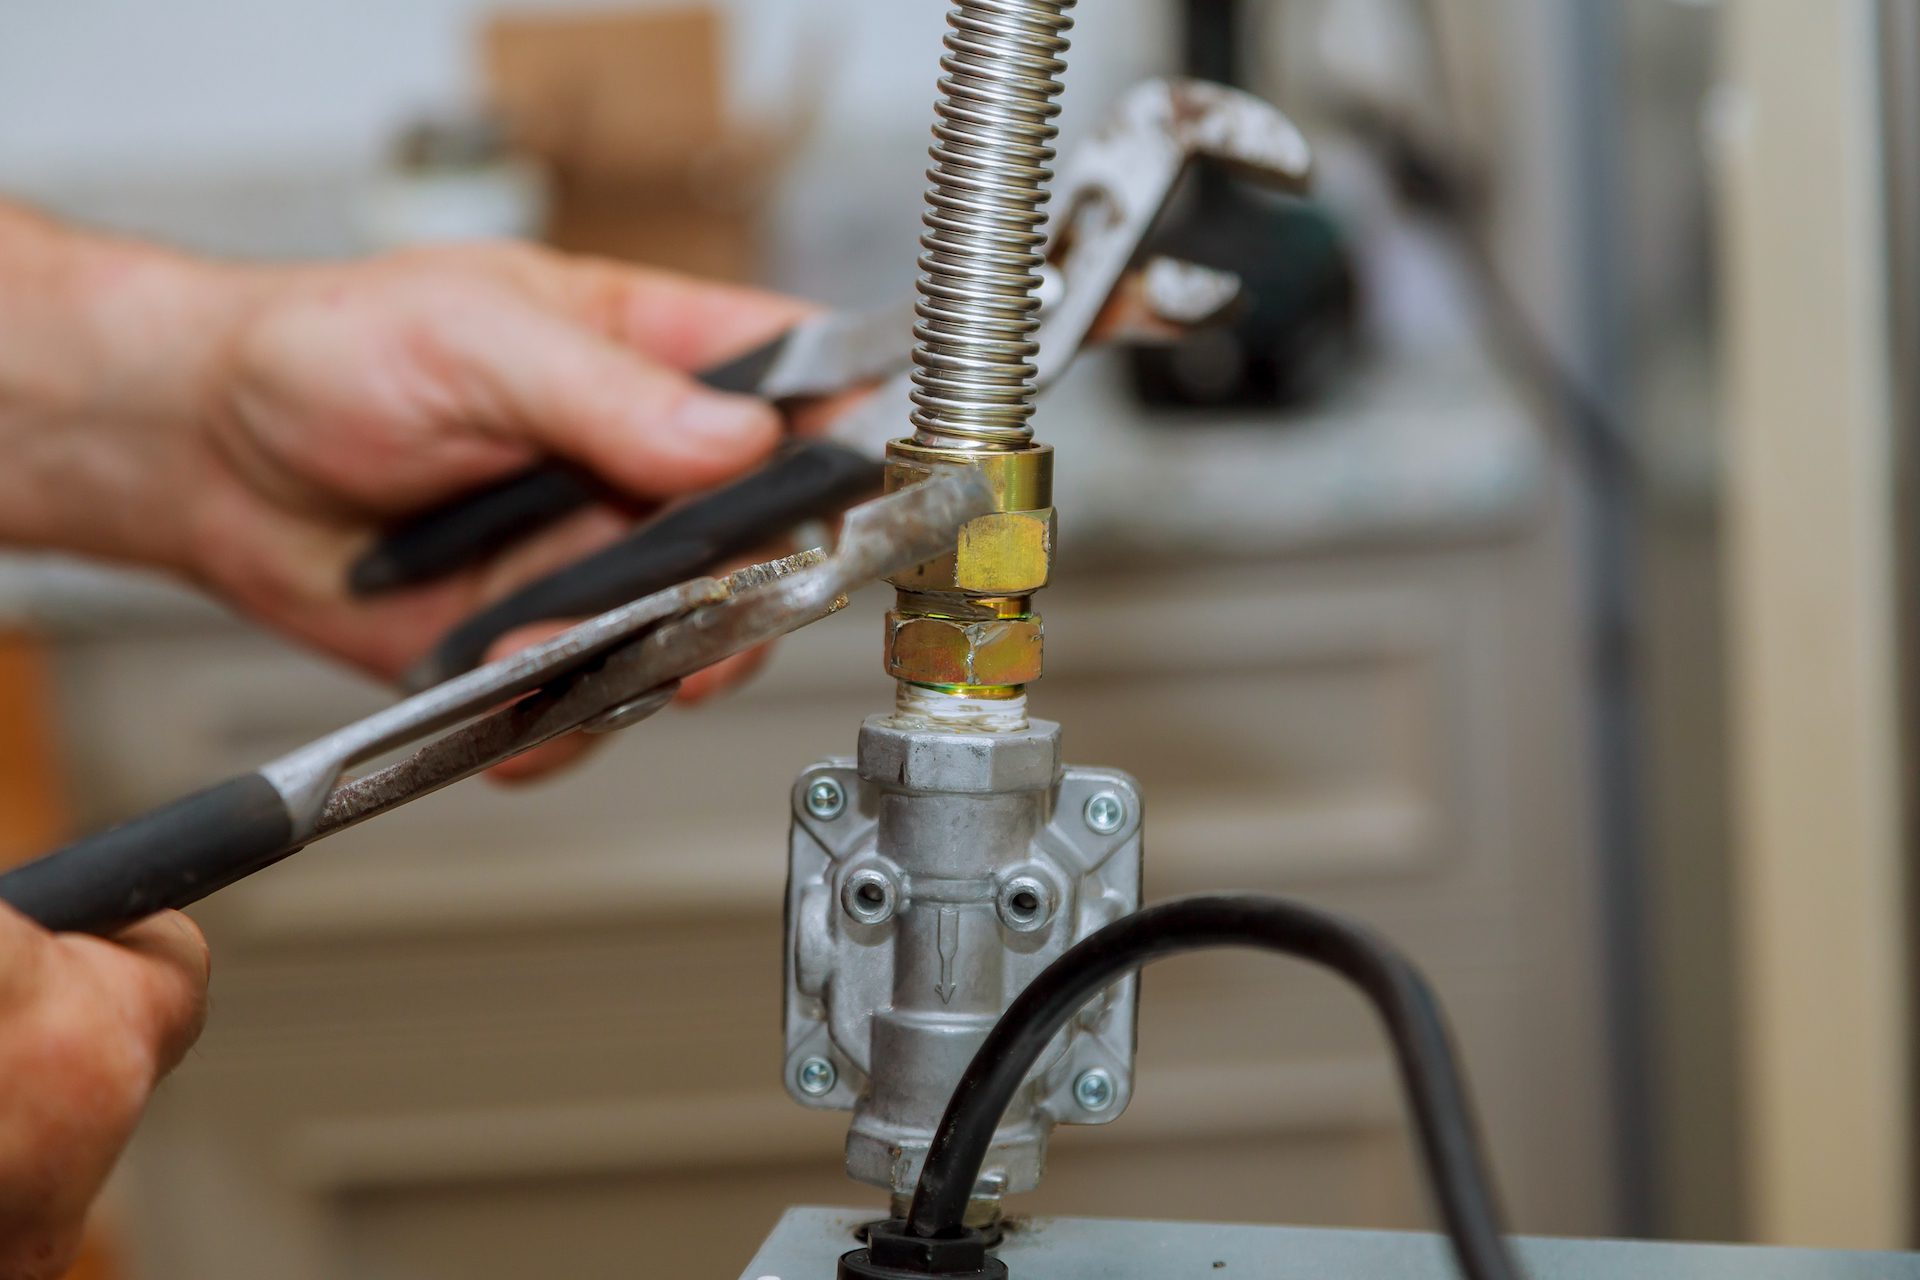 Convenient Locations to Install Gas Lines in Your Home